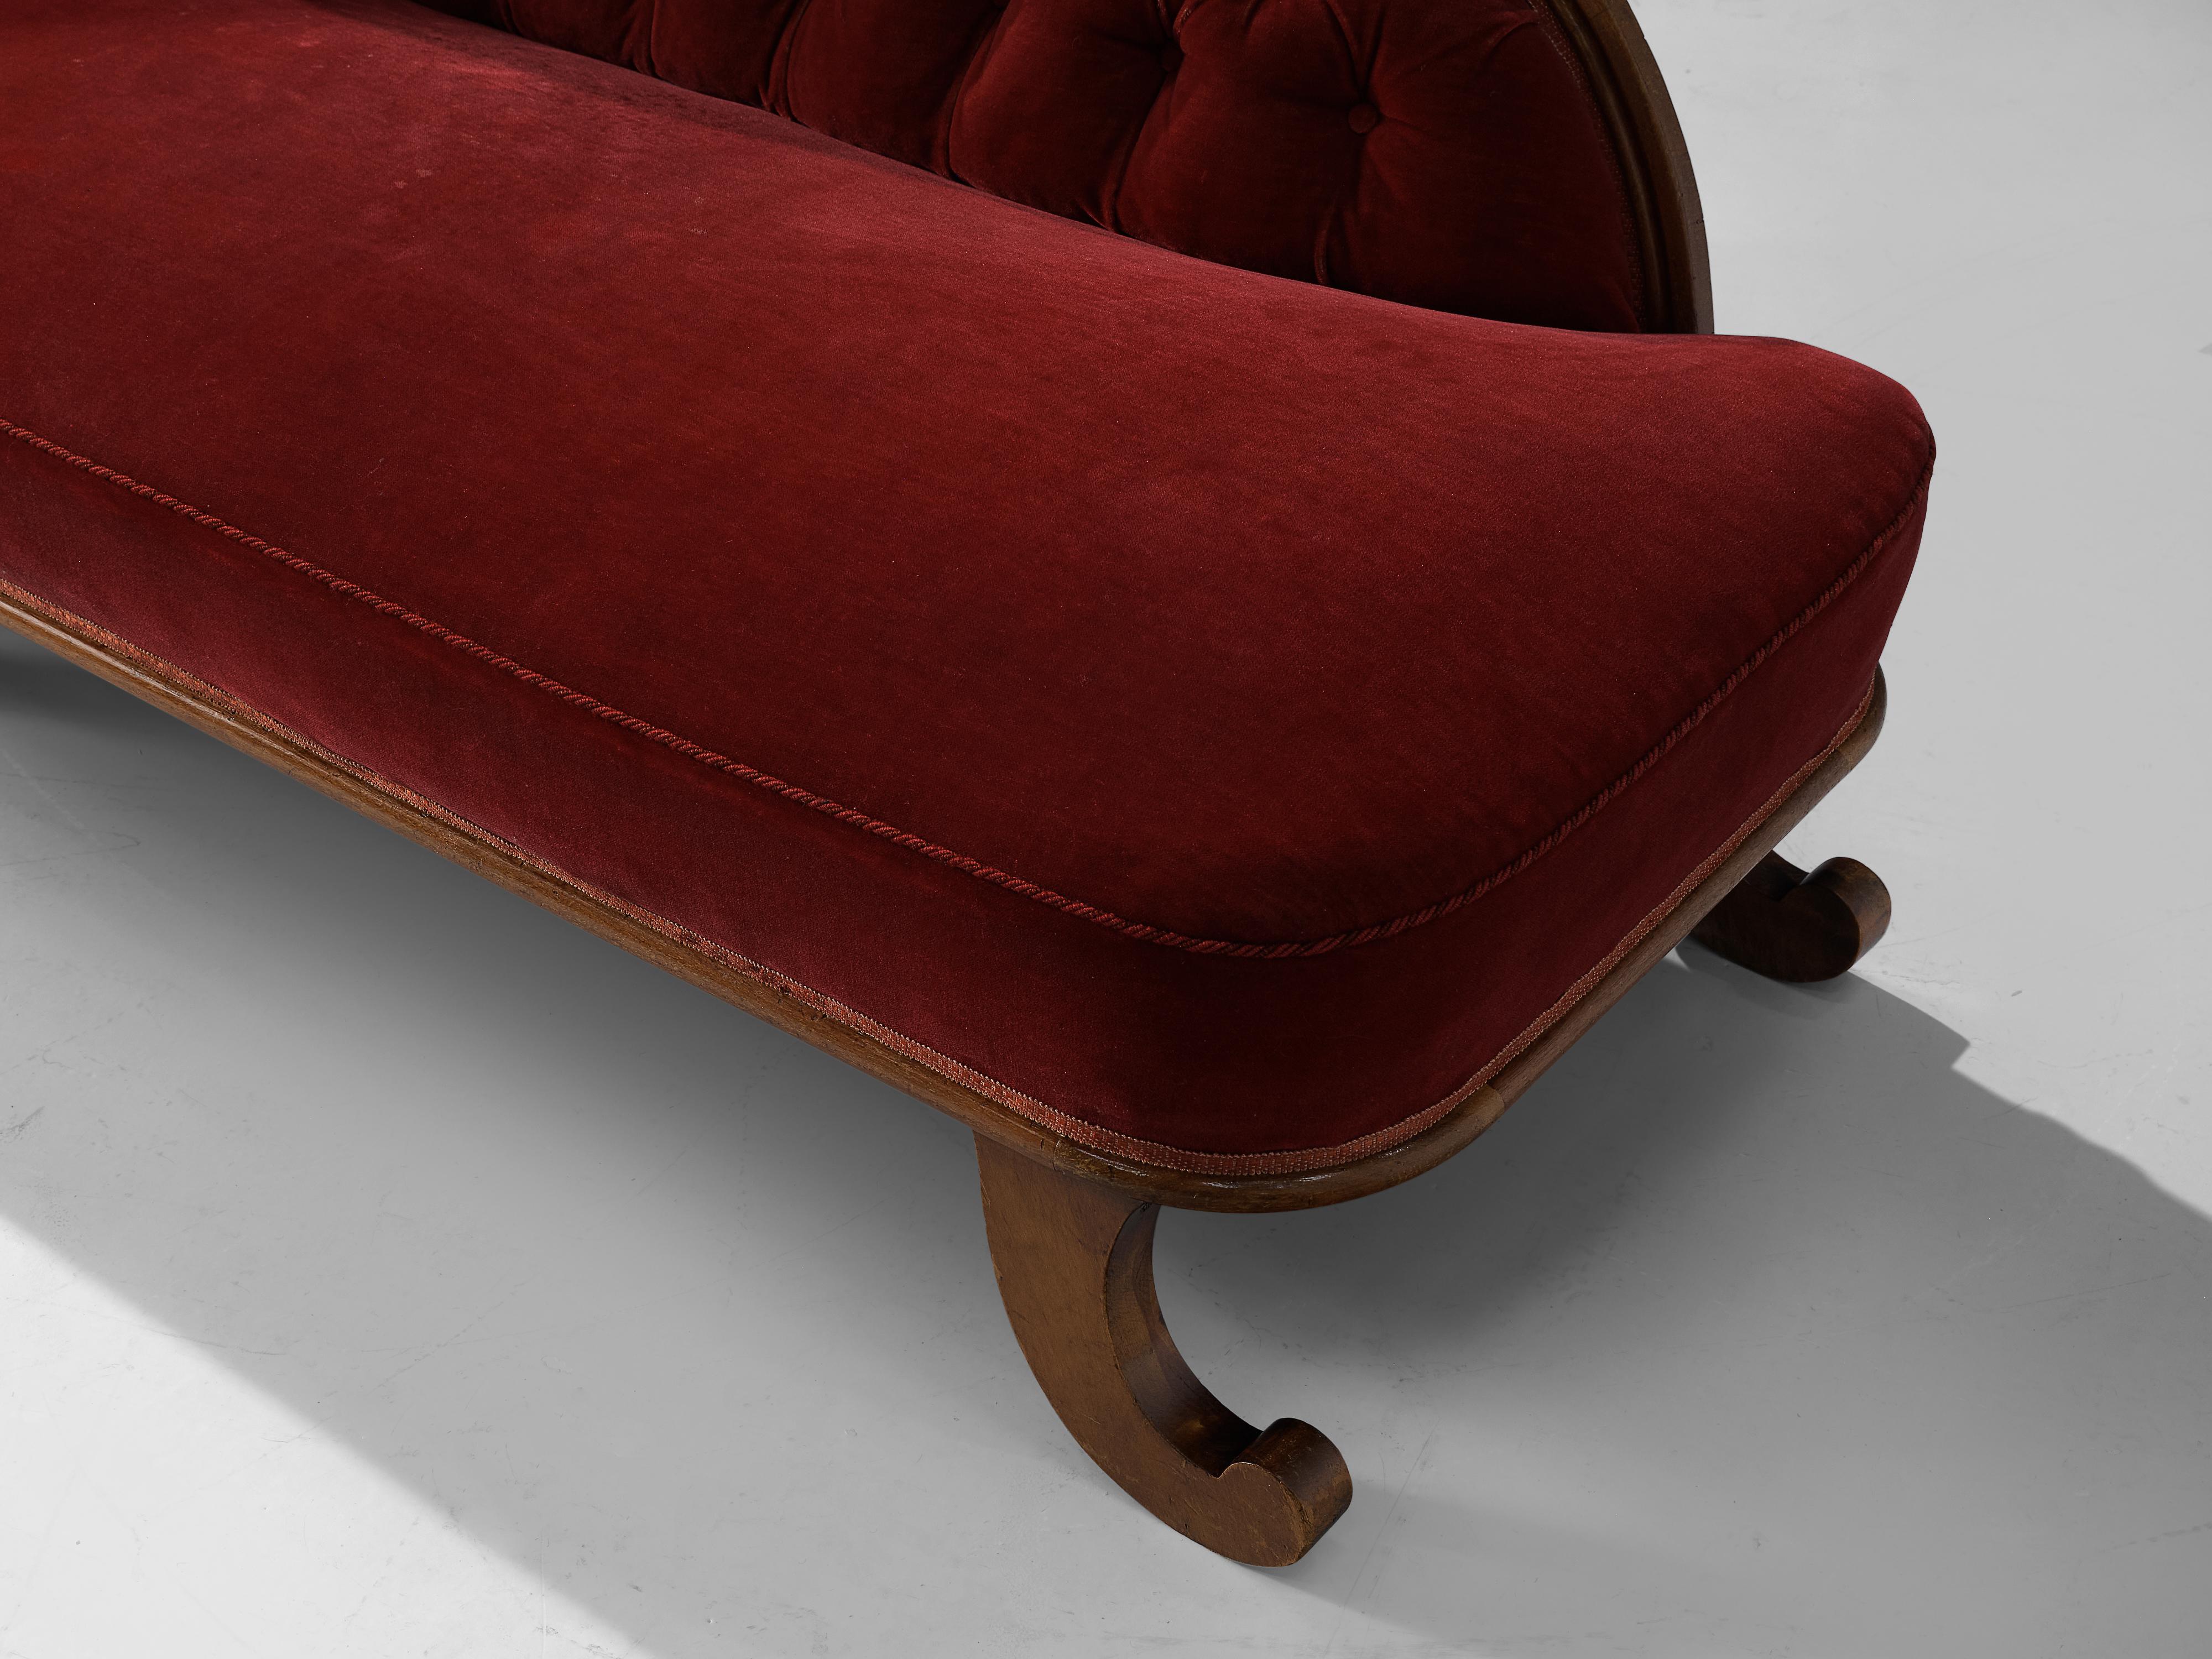 Daybed, velvet, walnut, France, 1930s

Very elegant art deco daybed in red velvet. The frame of the daybed is executed in walnut and shows stunning ornamental decorations. This is especially visible in the legs which are curled upwards, adding to